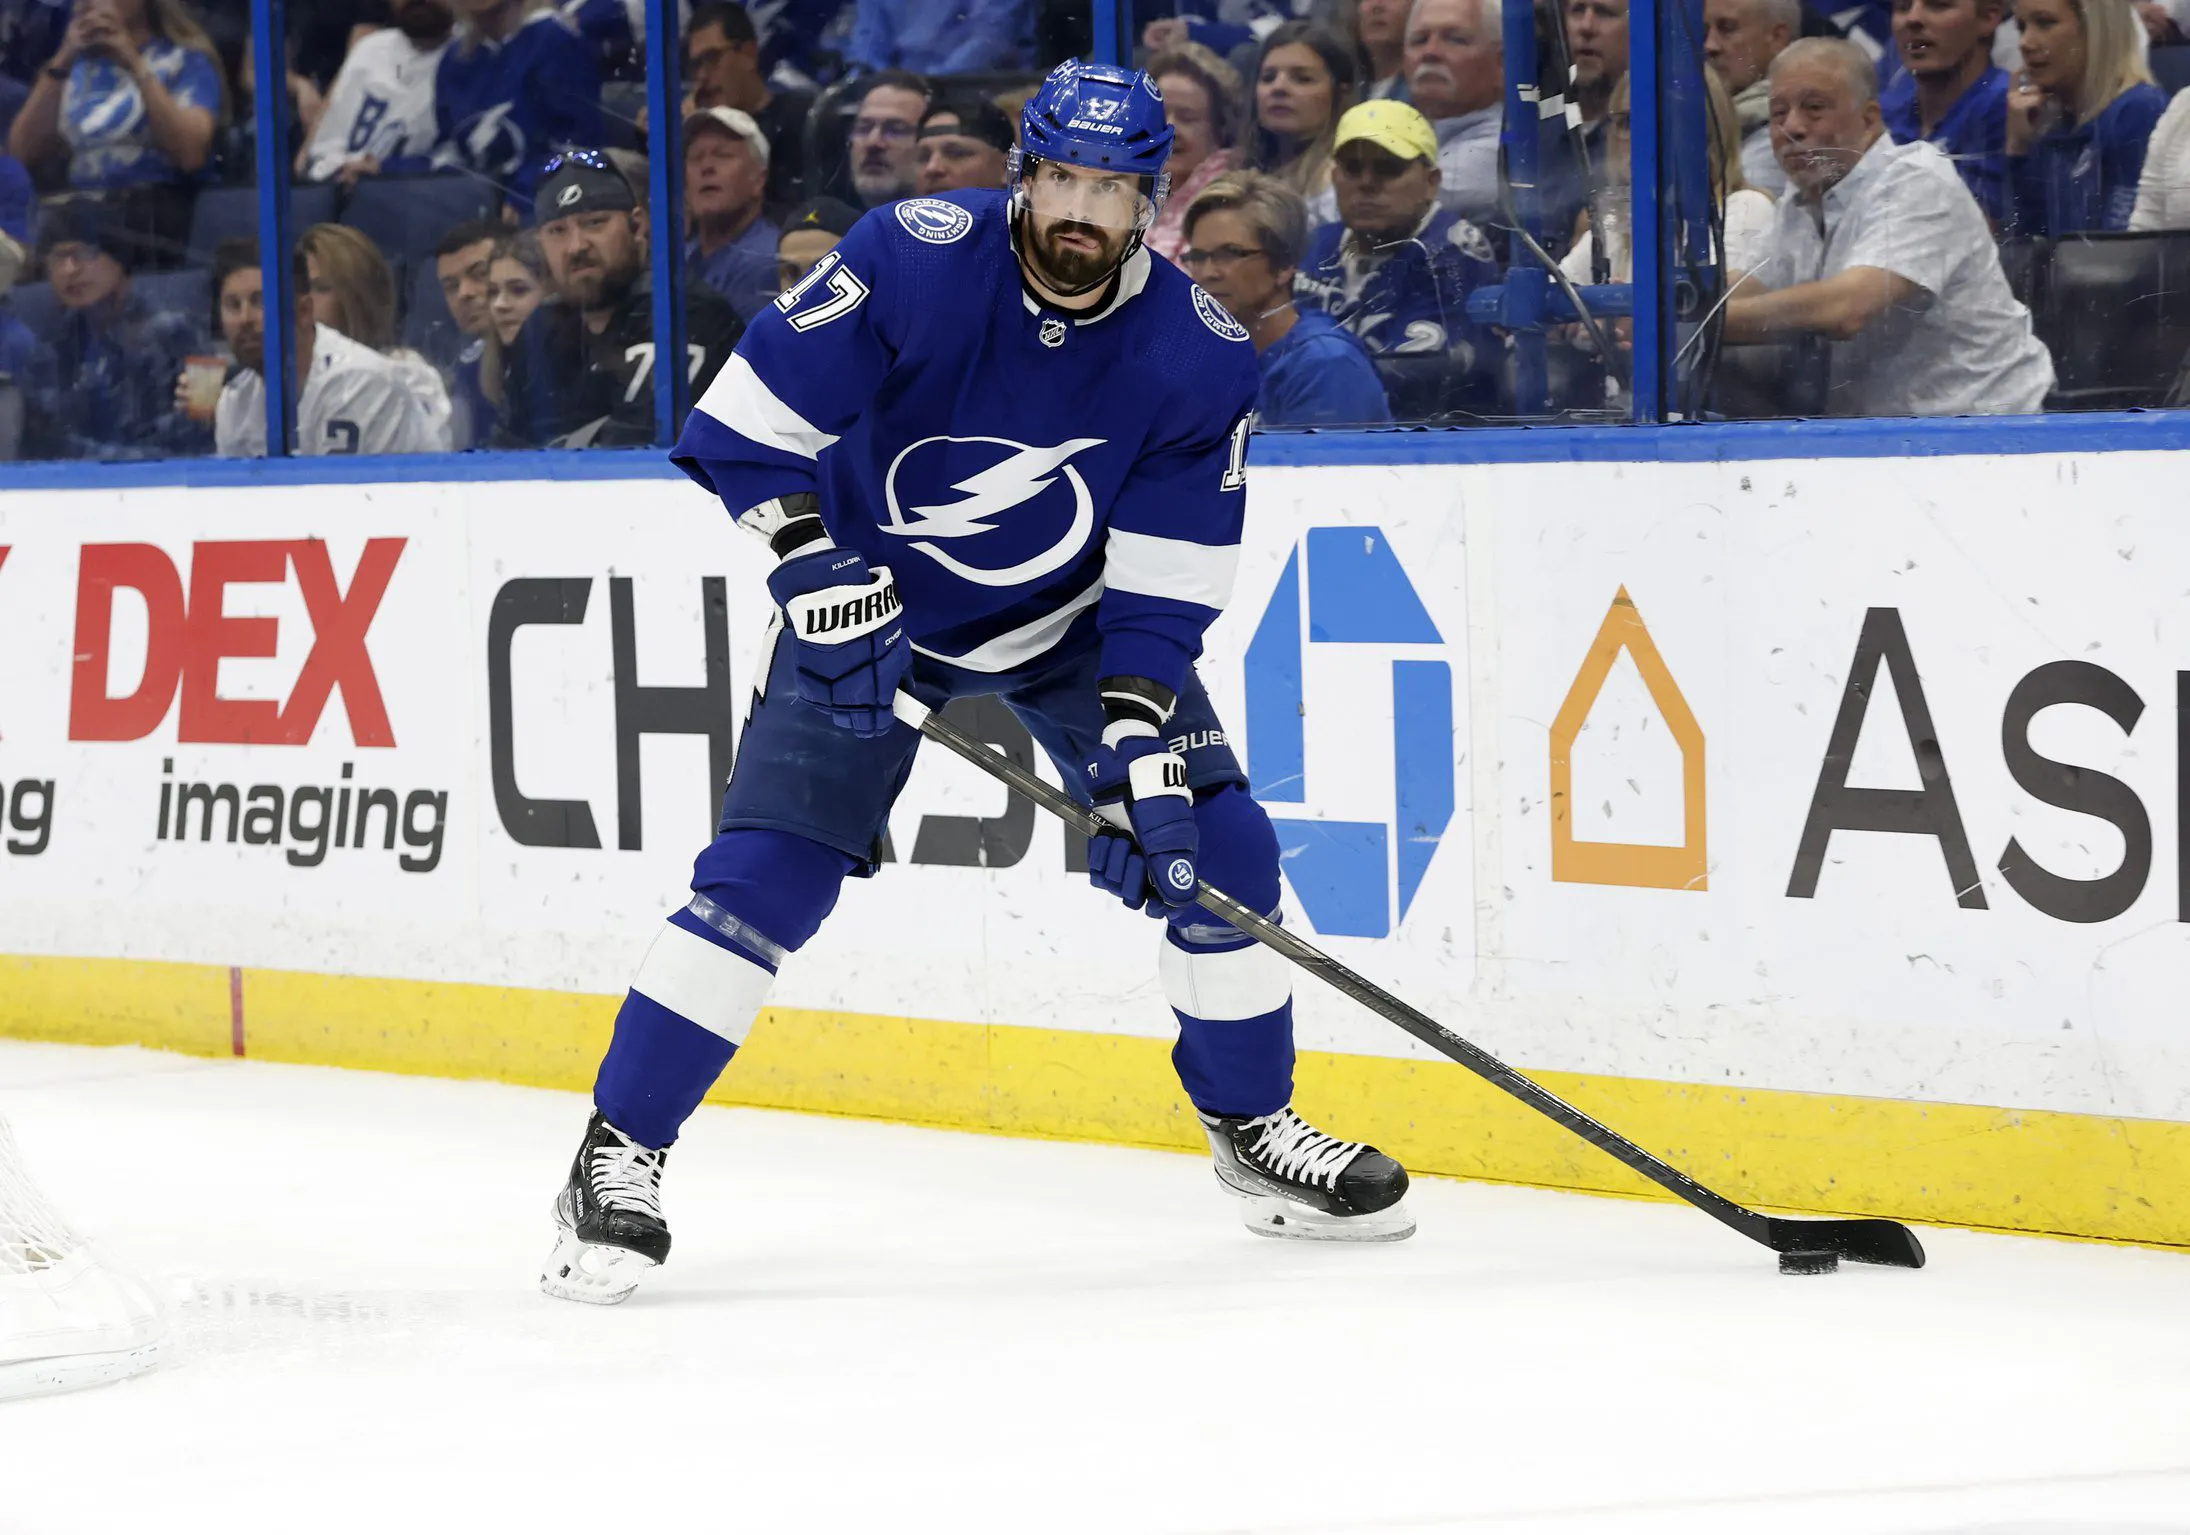 Anaheim Ducks sign Alex Killorn to four-year contract with $6.25 million AAV